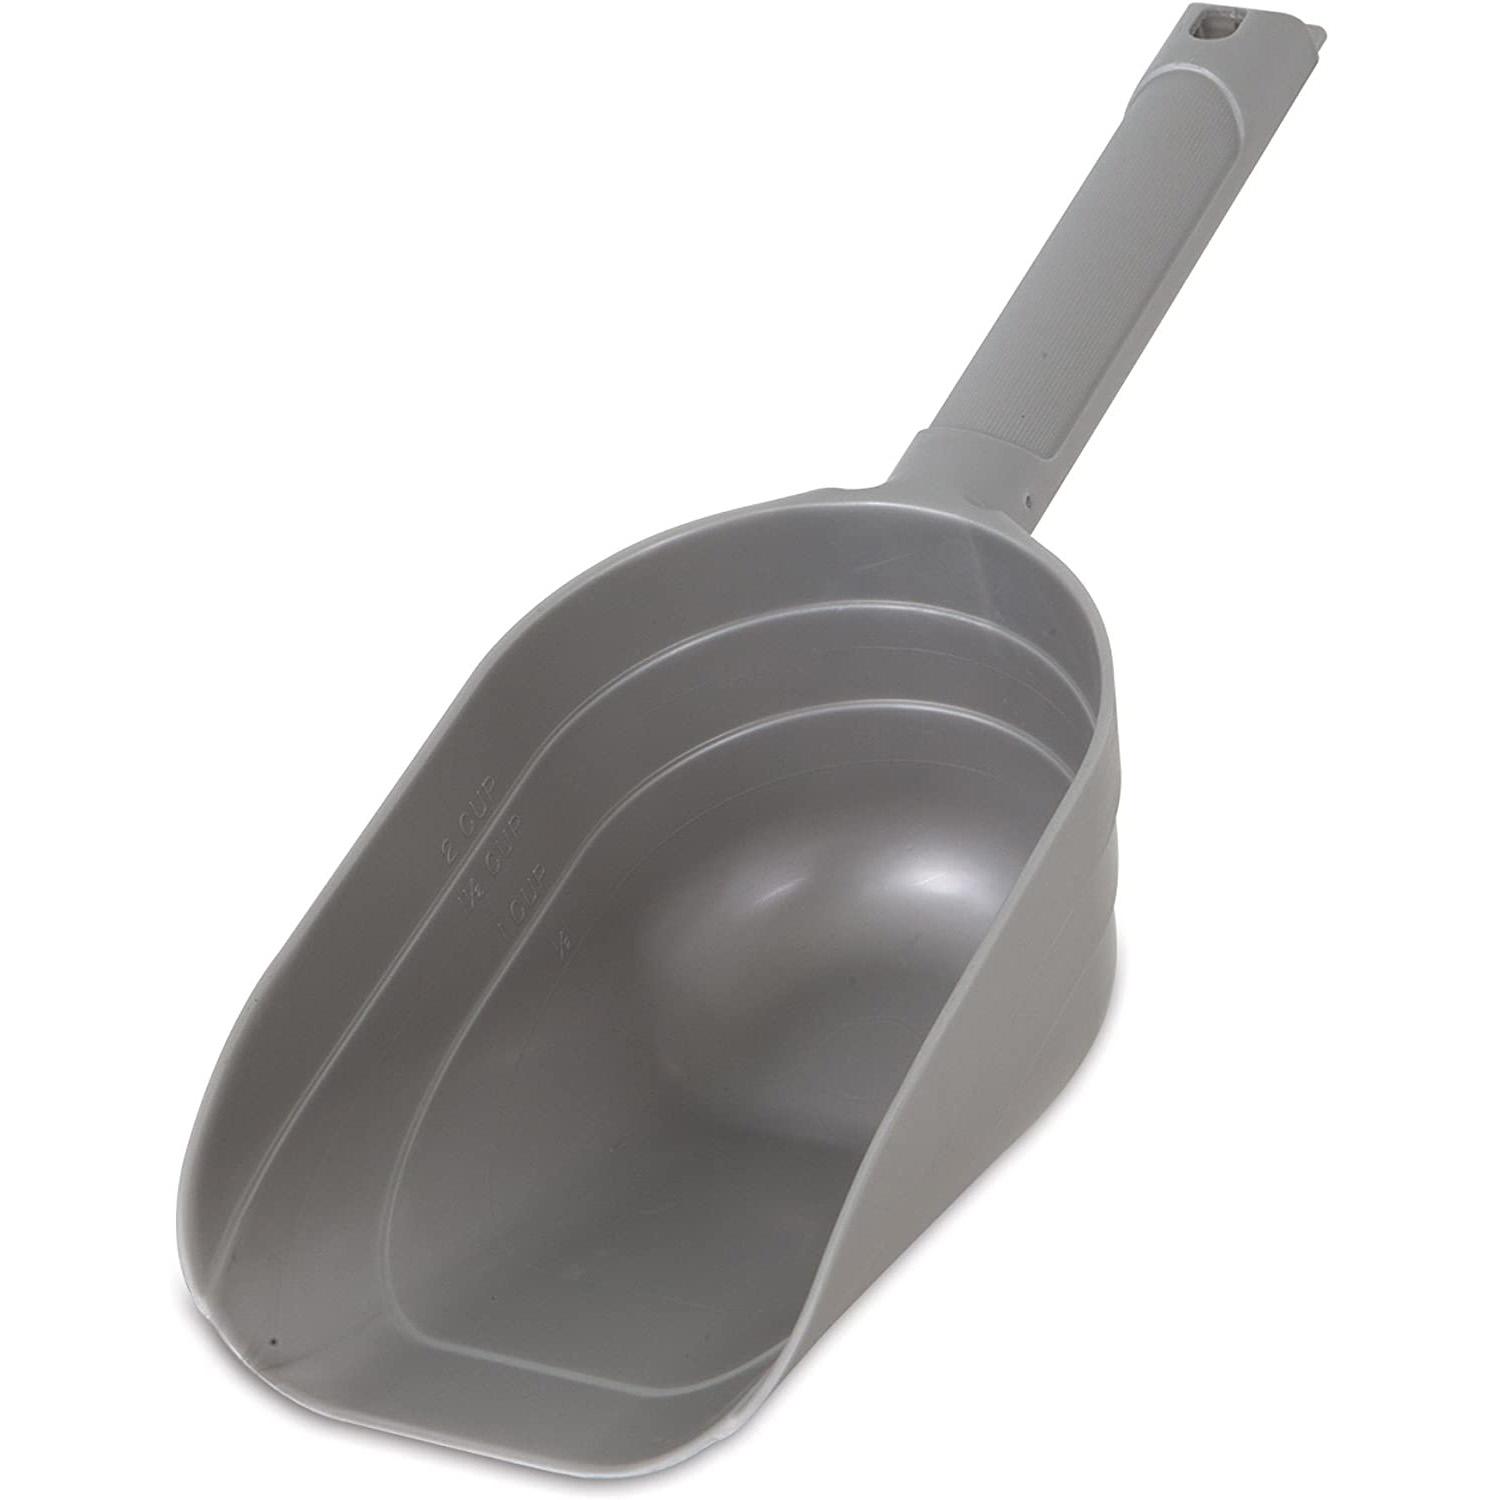 Petmate 2 Cup Pet Food Scoop With Measuring Lines for $1.75